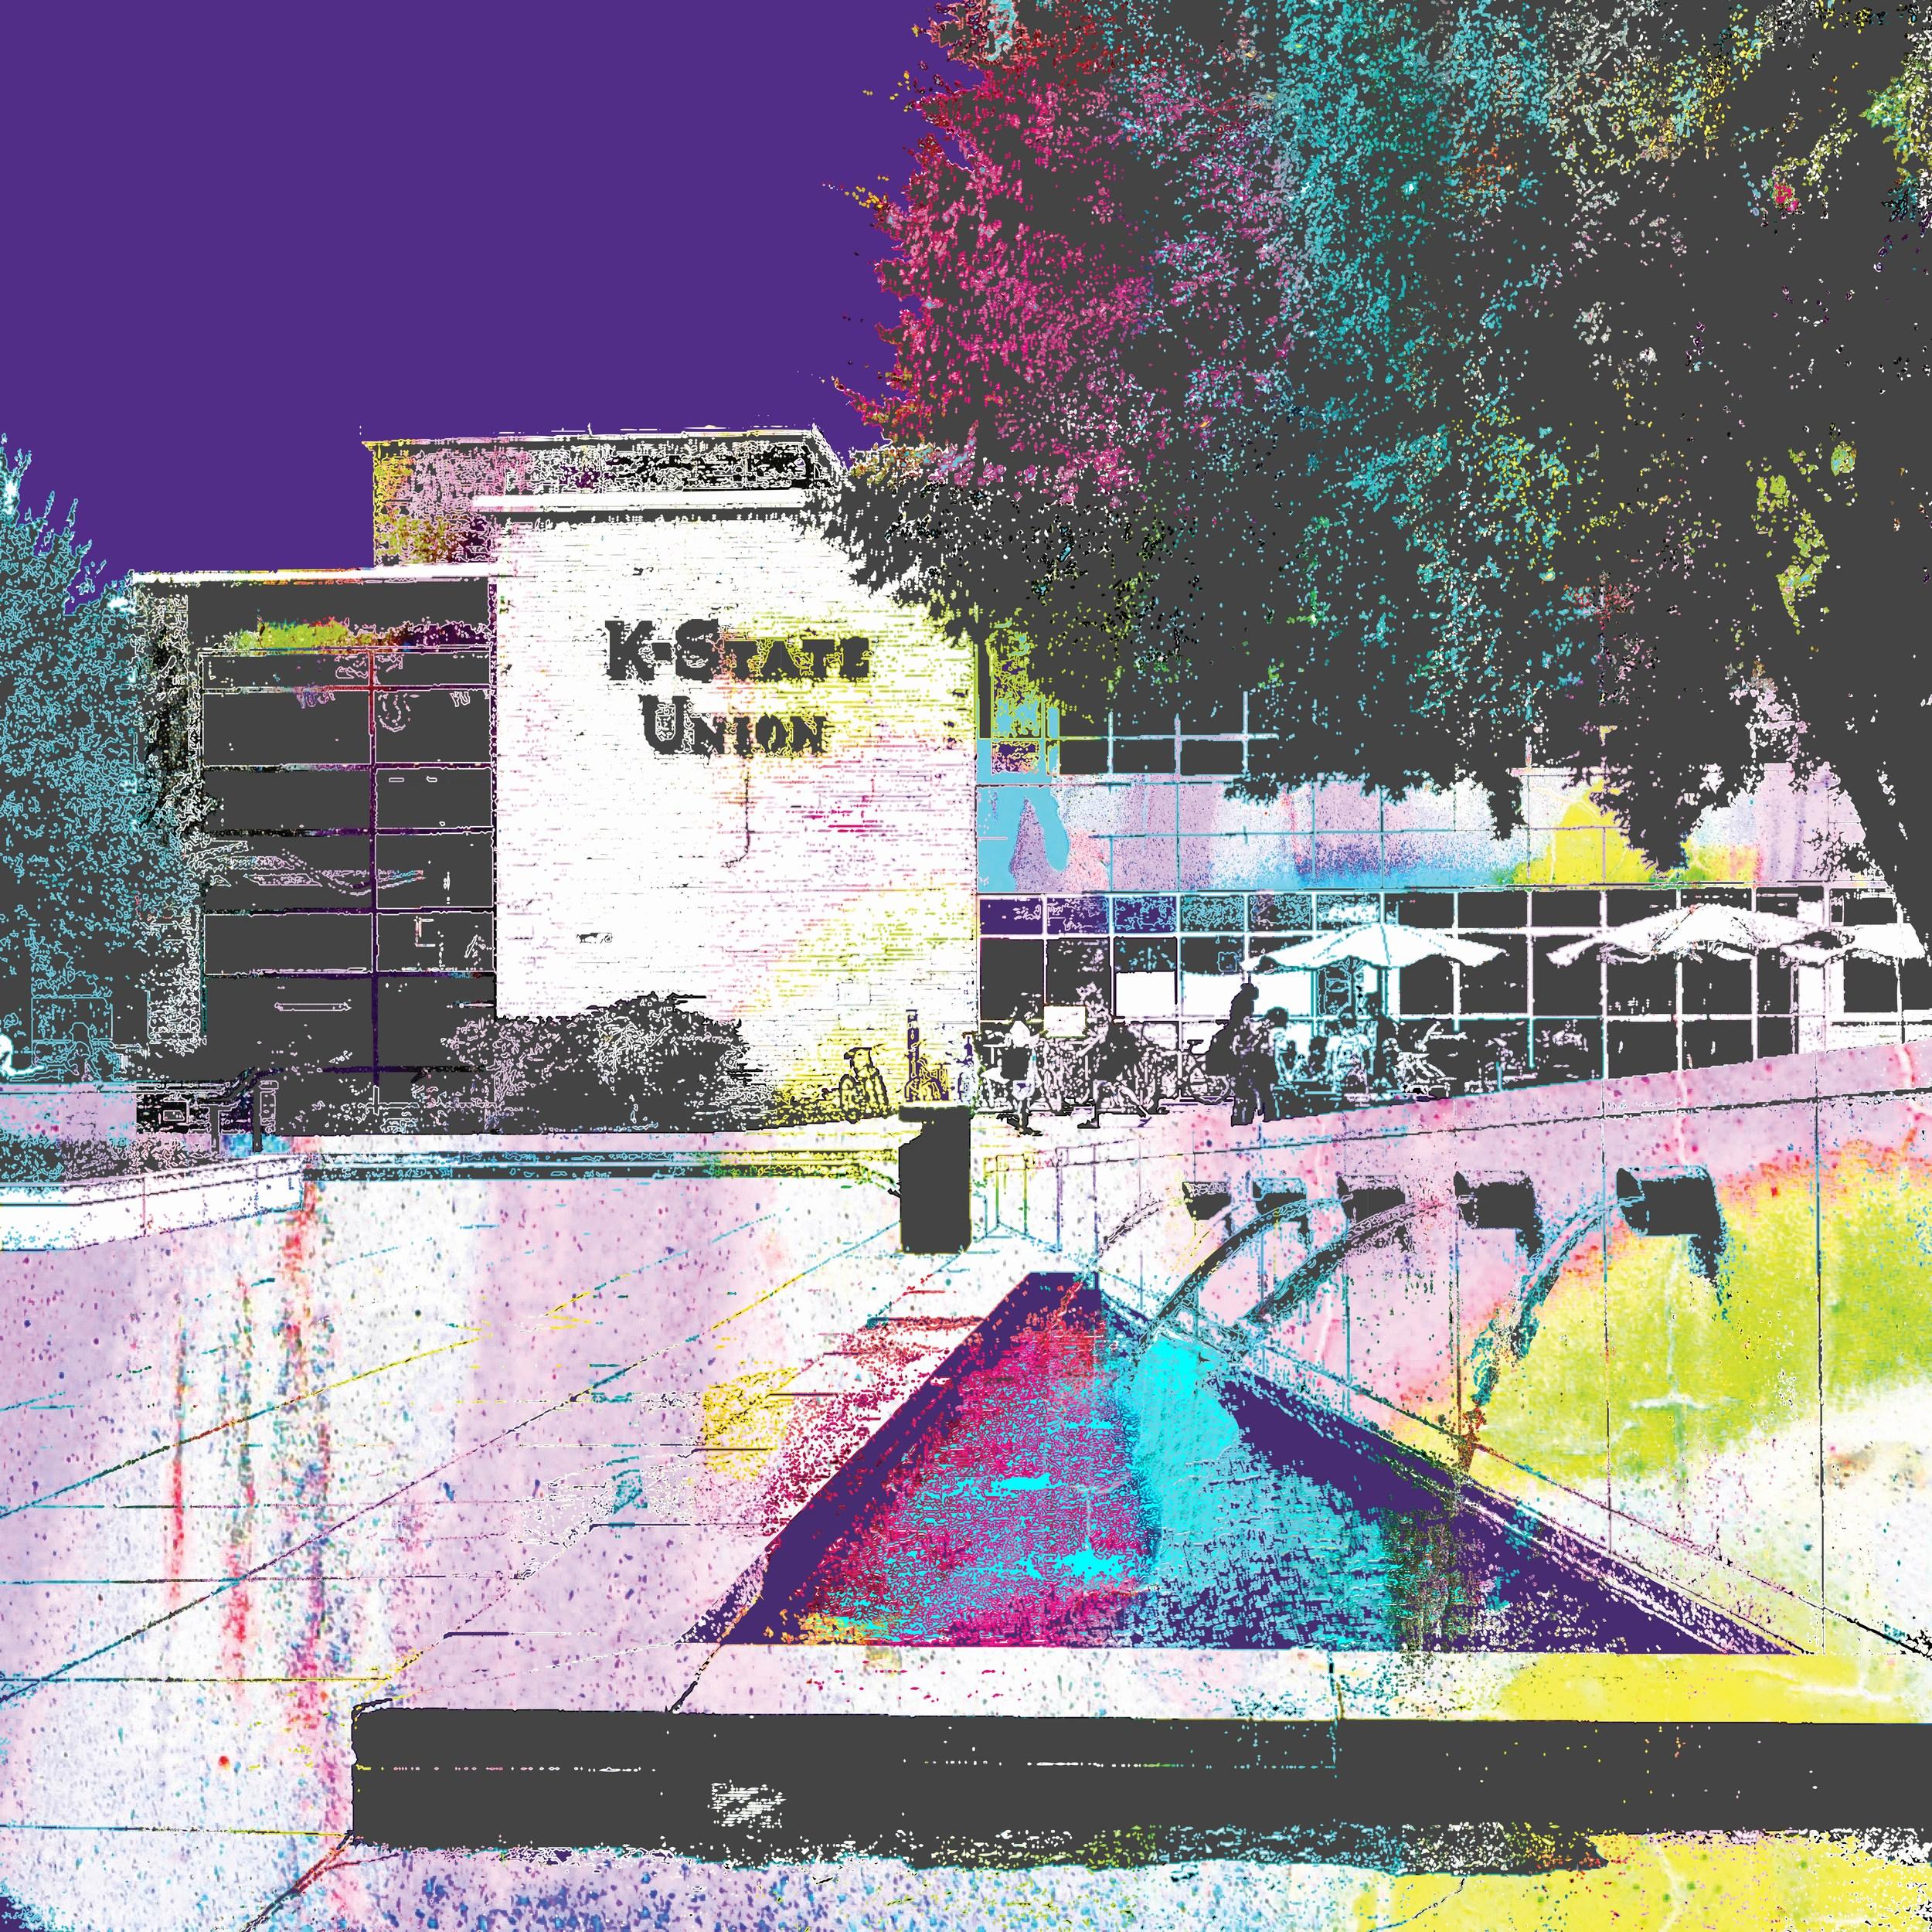 Katrina Revenaugh
“K-State Student Union”
Dye Sublimation Print on Aluminum, 2024
Size Options: 12 x 12 inches, 20 x 20 inches or 30 x 30 inches
Edition: 75 + AP
Signed and titled on label provided separately
COA included

Tags: #ArtisticExpression